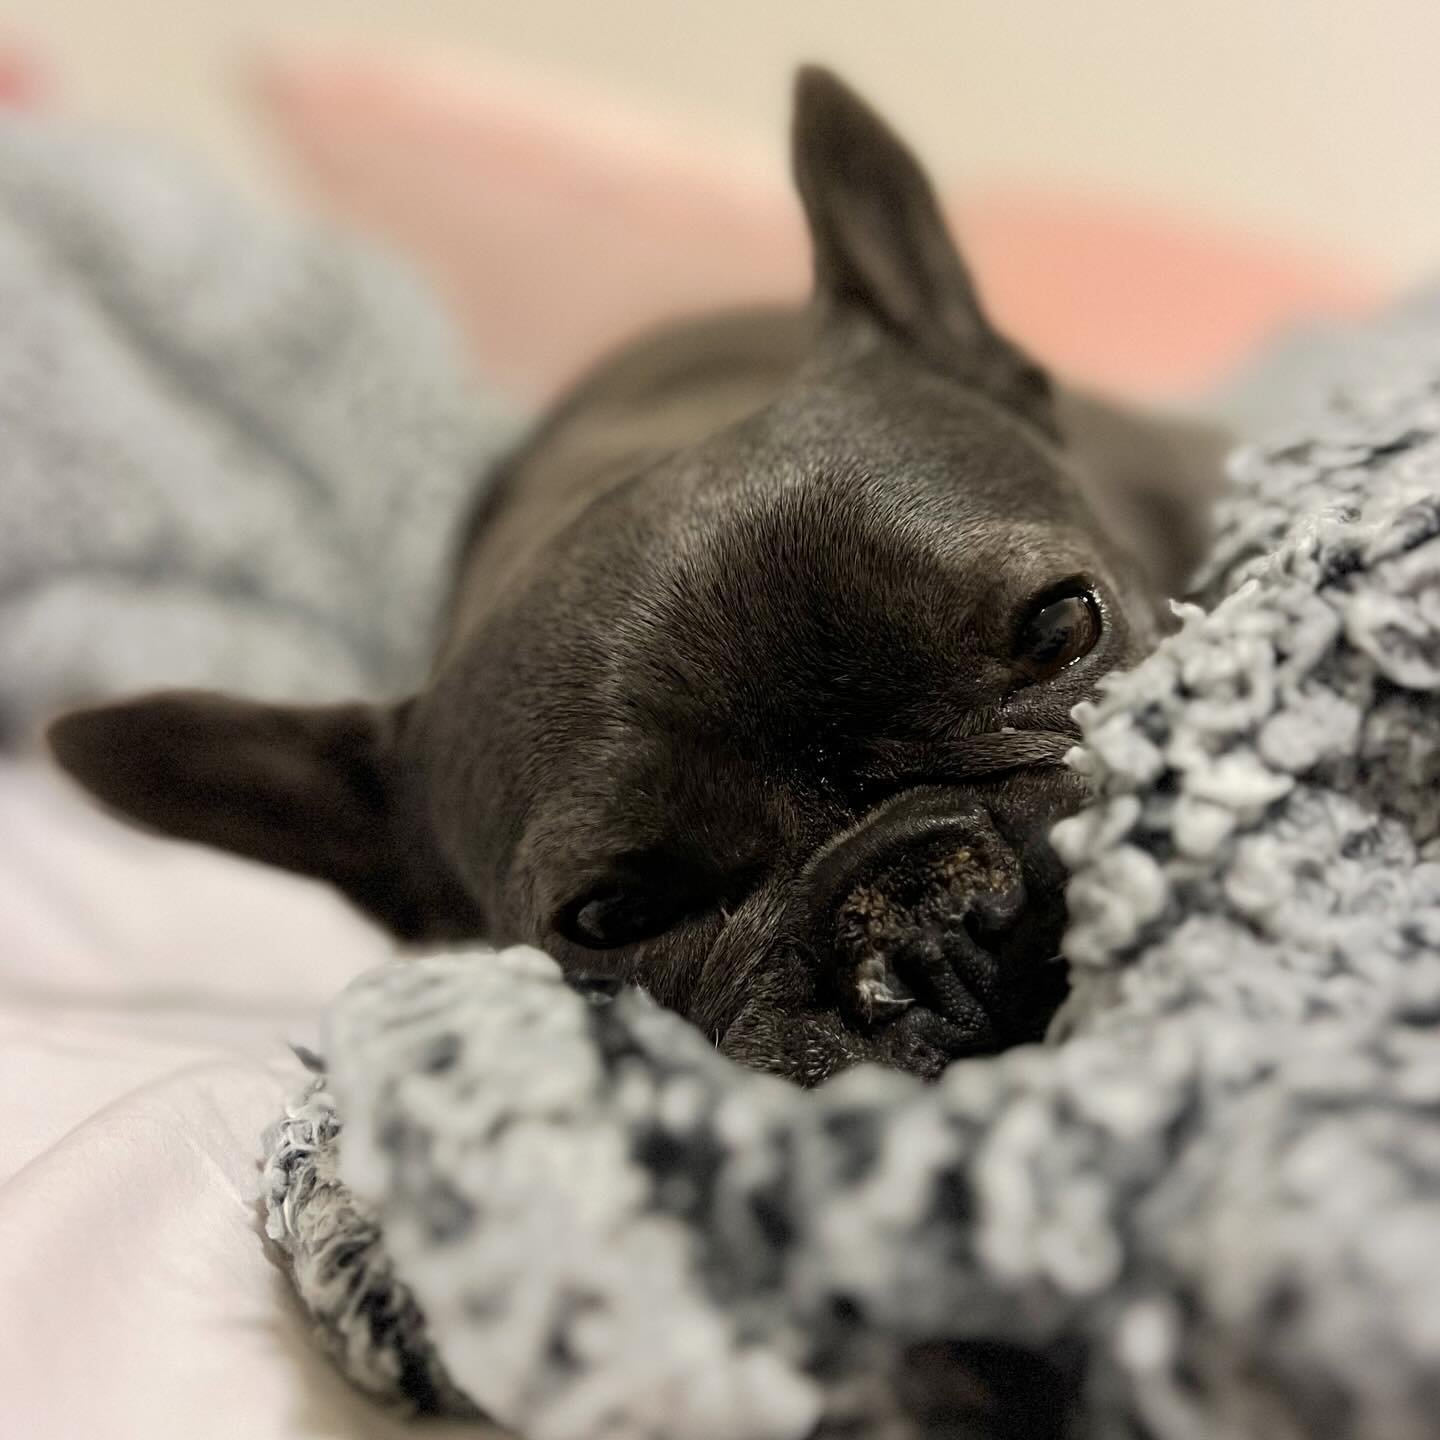 When you&rsquo;re super cute but also tired of all the photos! #frenchielife #dogmodel #tacomadogboarding #tacomafrenchie #olympiafrenchies #seattlefrenchbulldogs